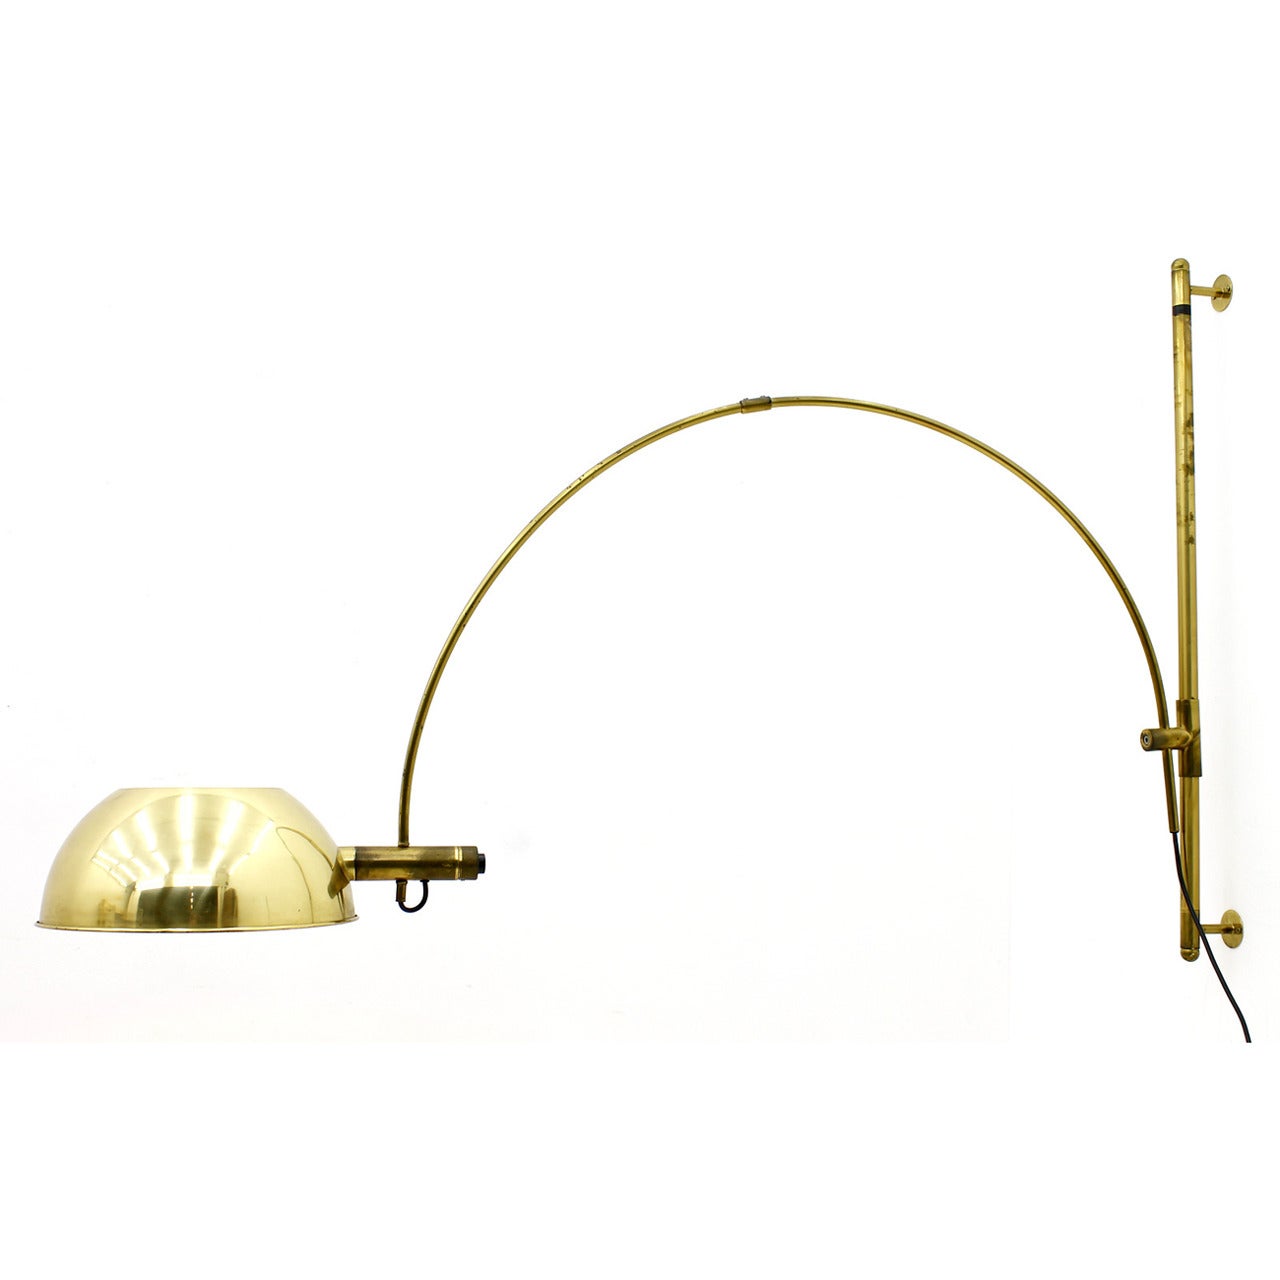 Rare Wall-Mounted Adjustable Arc Lamp by Florian Schulz, Germany, 1970